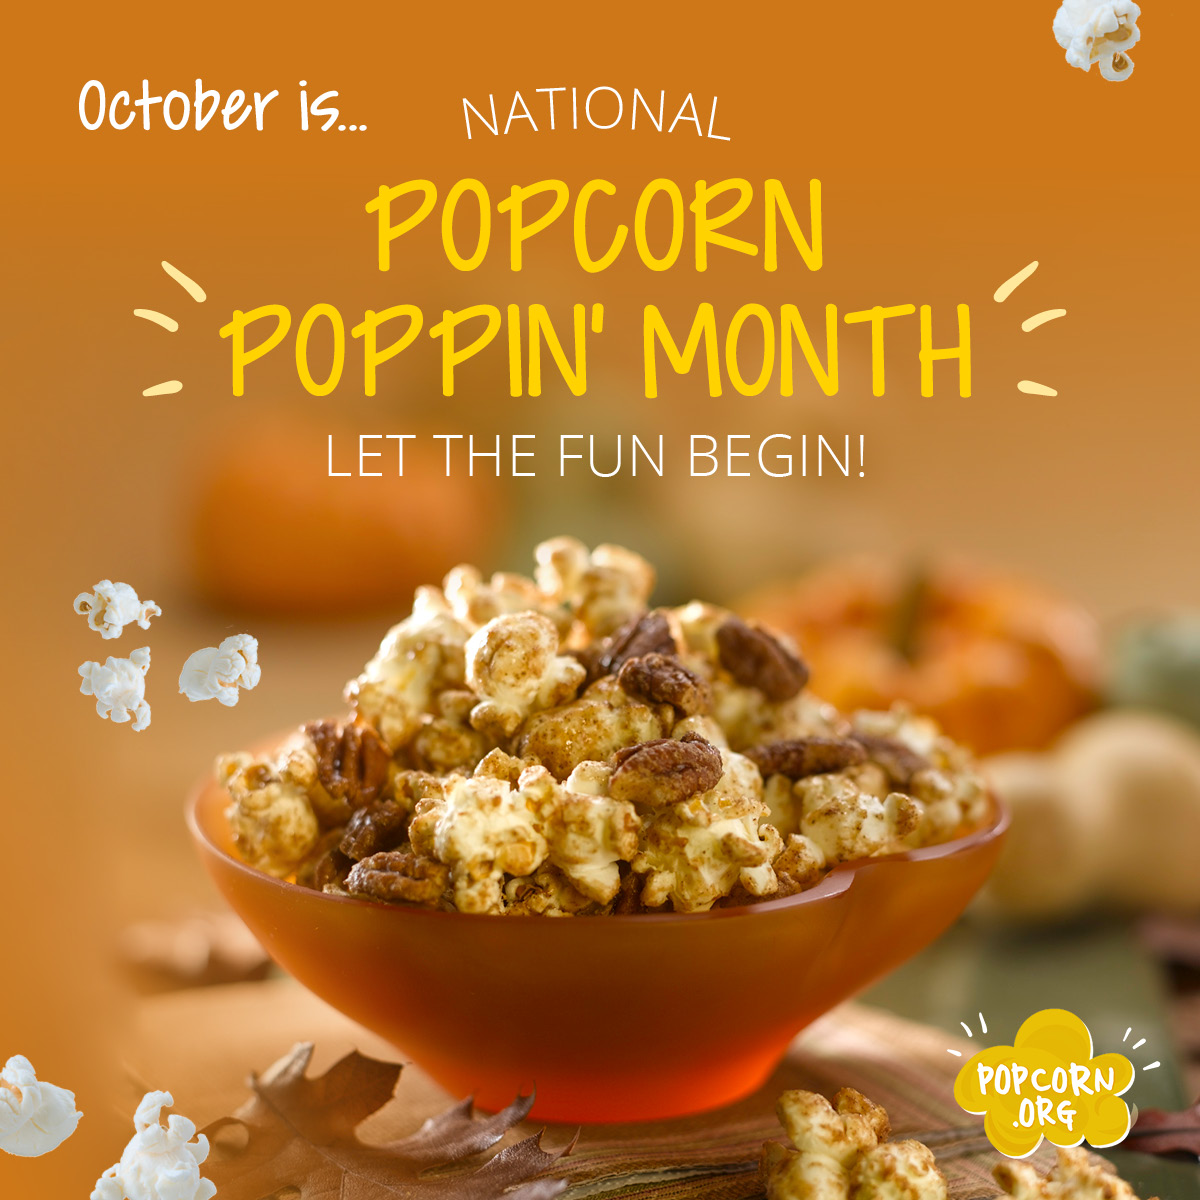 October is Popcorn Poppin Month